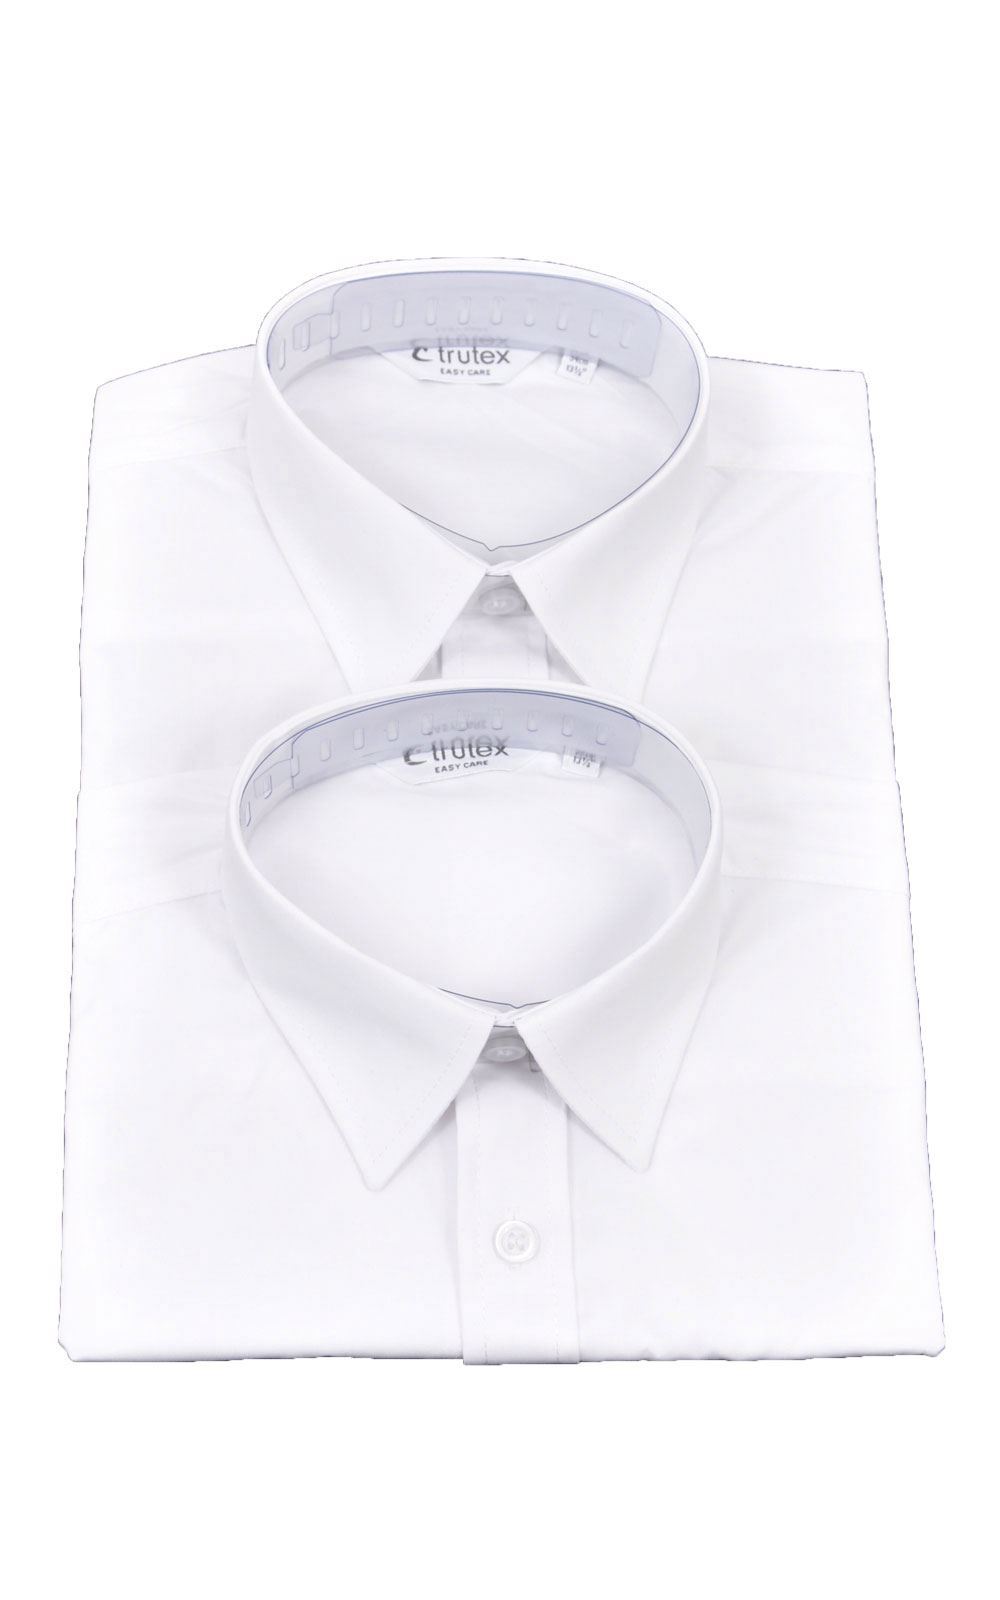 Picture of Plain White Long Sleeved Shirts Twin Pack - Trutex